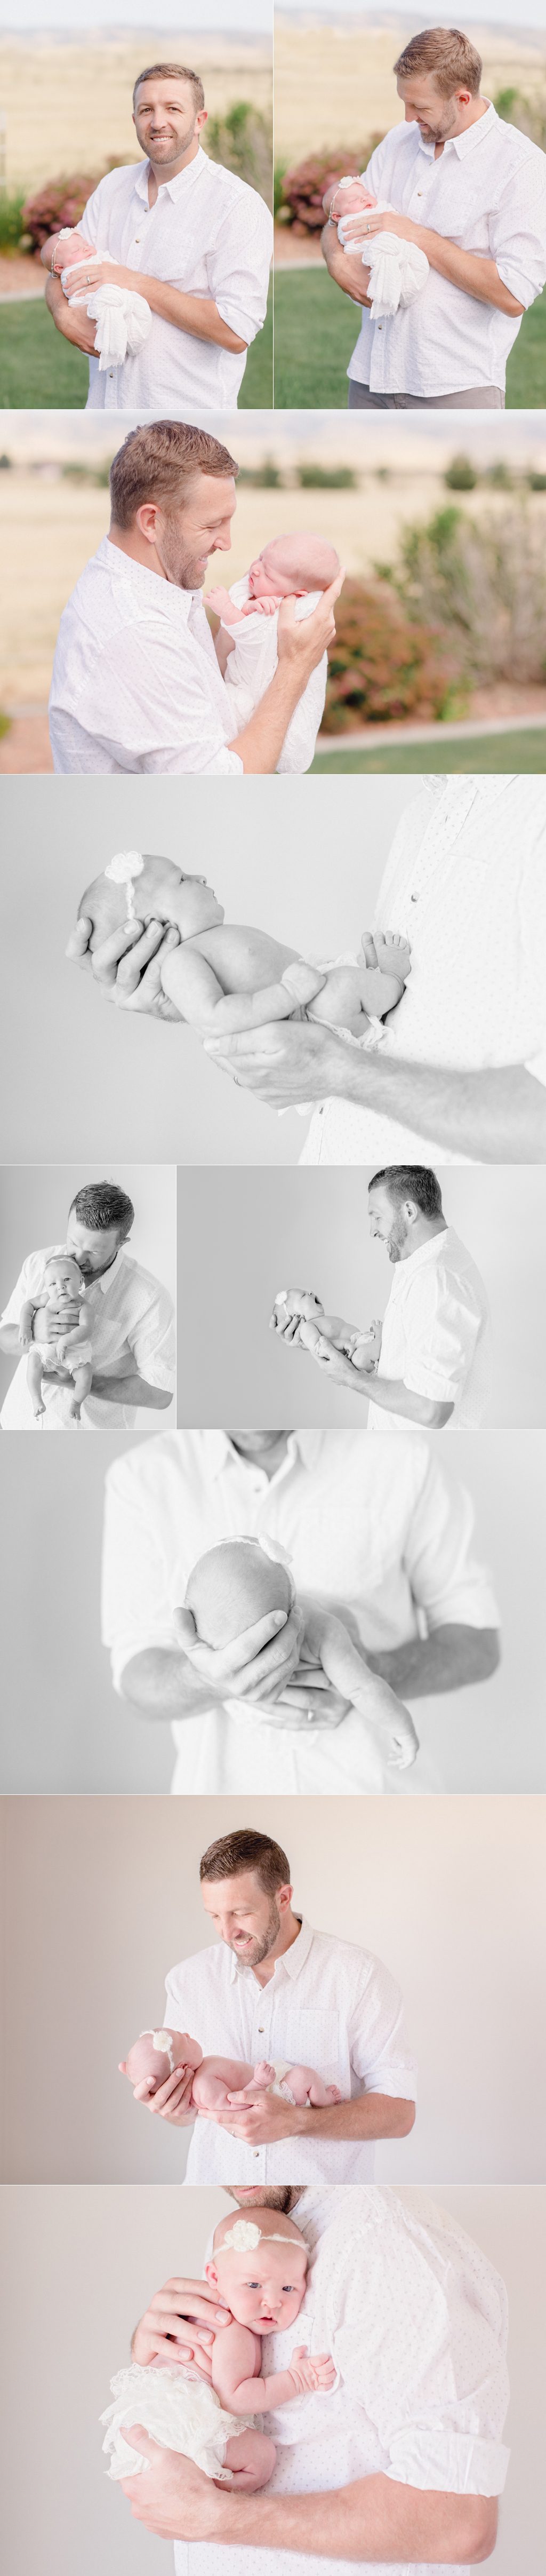 Father and daughter newborn portraits on location.